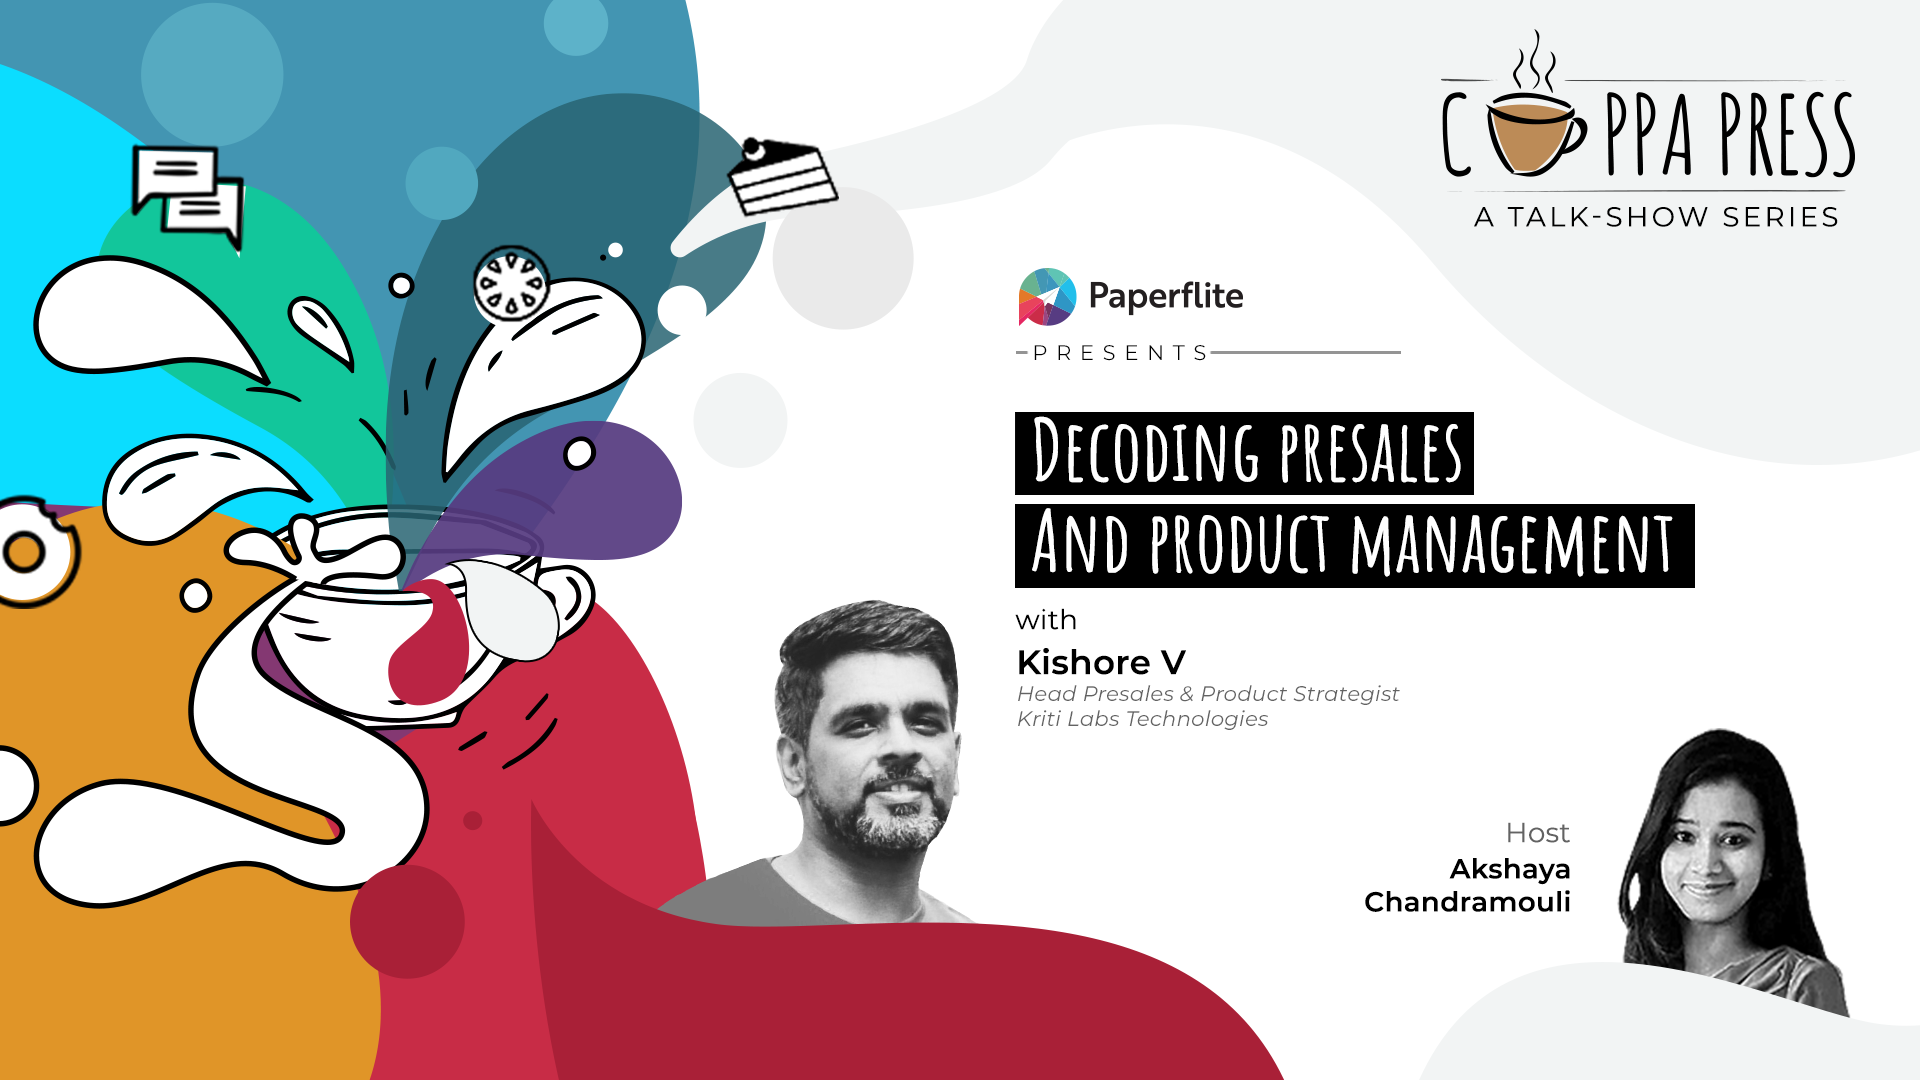 Decoding Presales and Product Management - Cuppa Press
